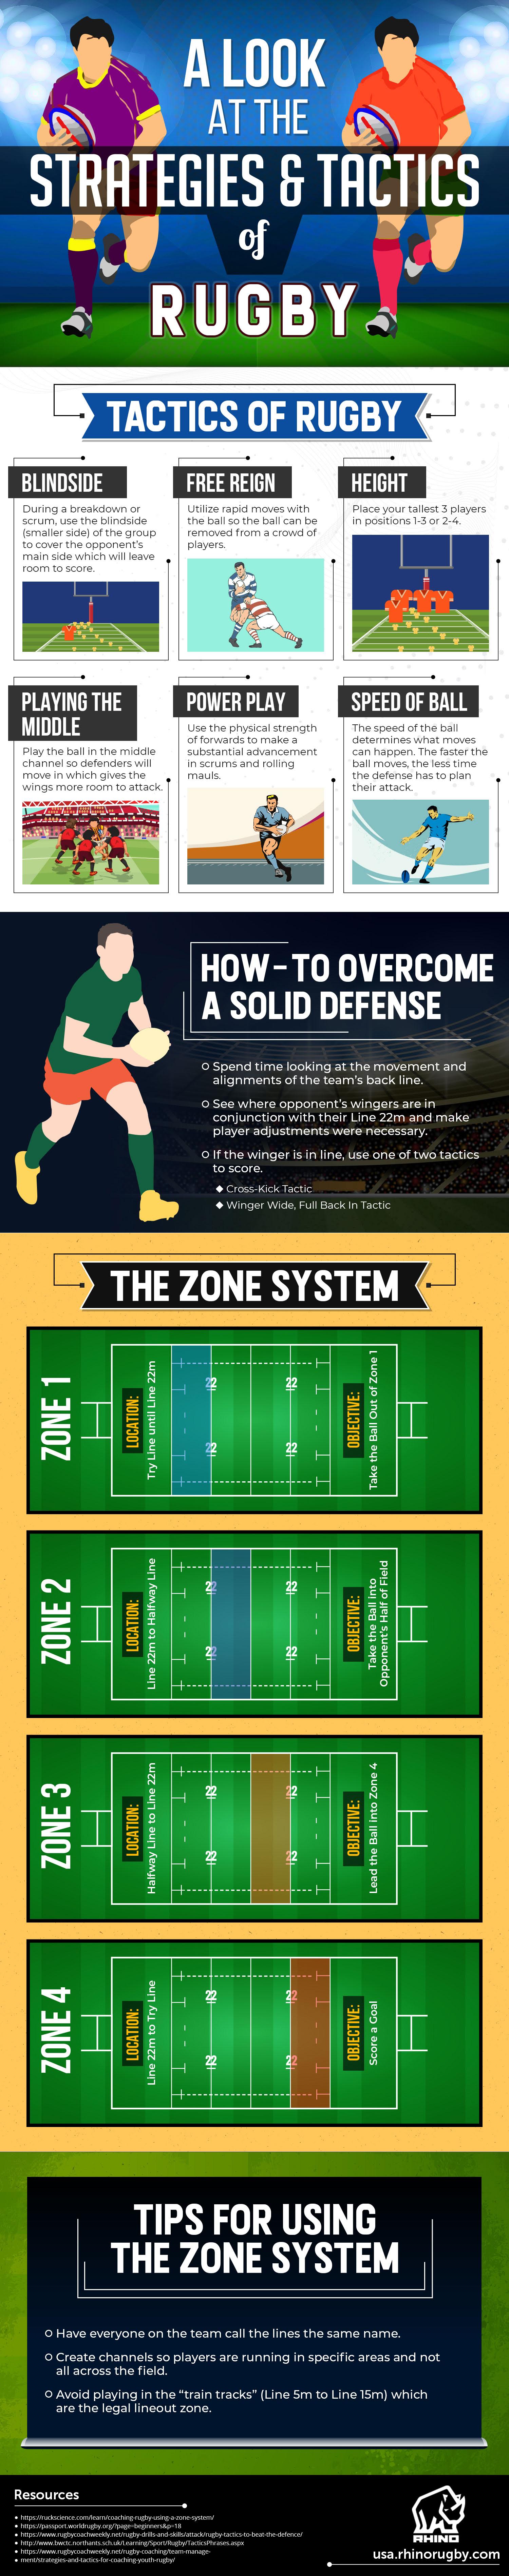 A Look at the Strategies and Tactics of Rugby #infographic